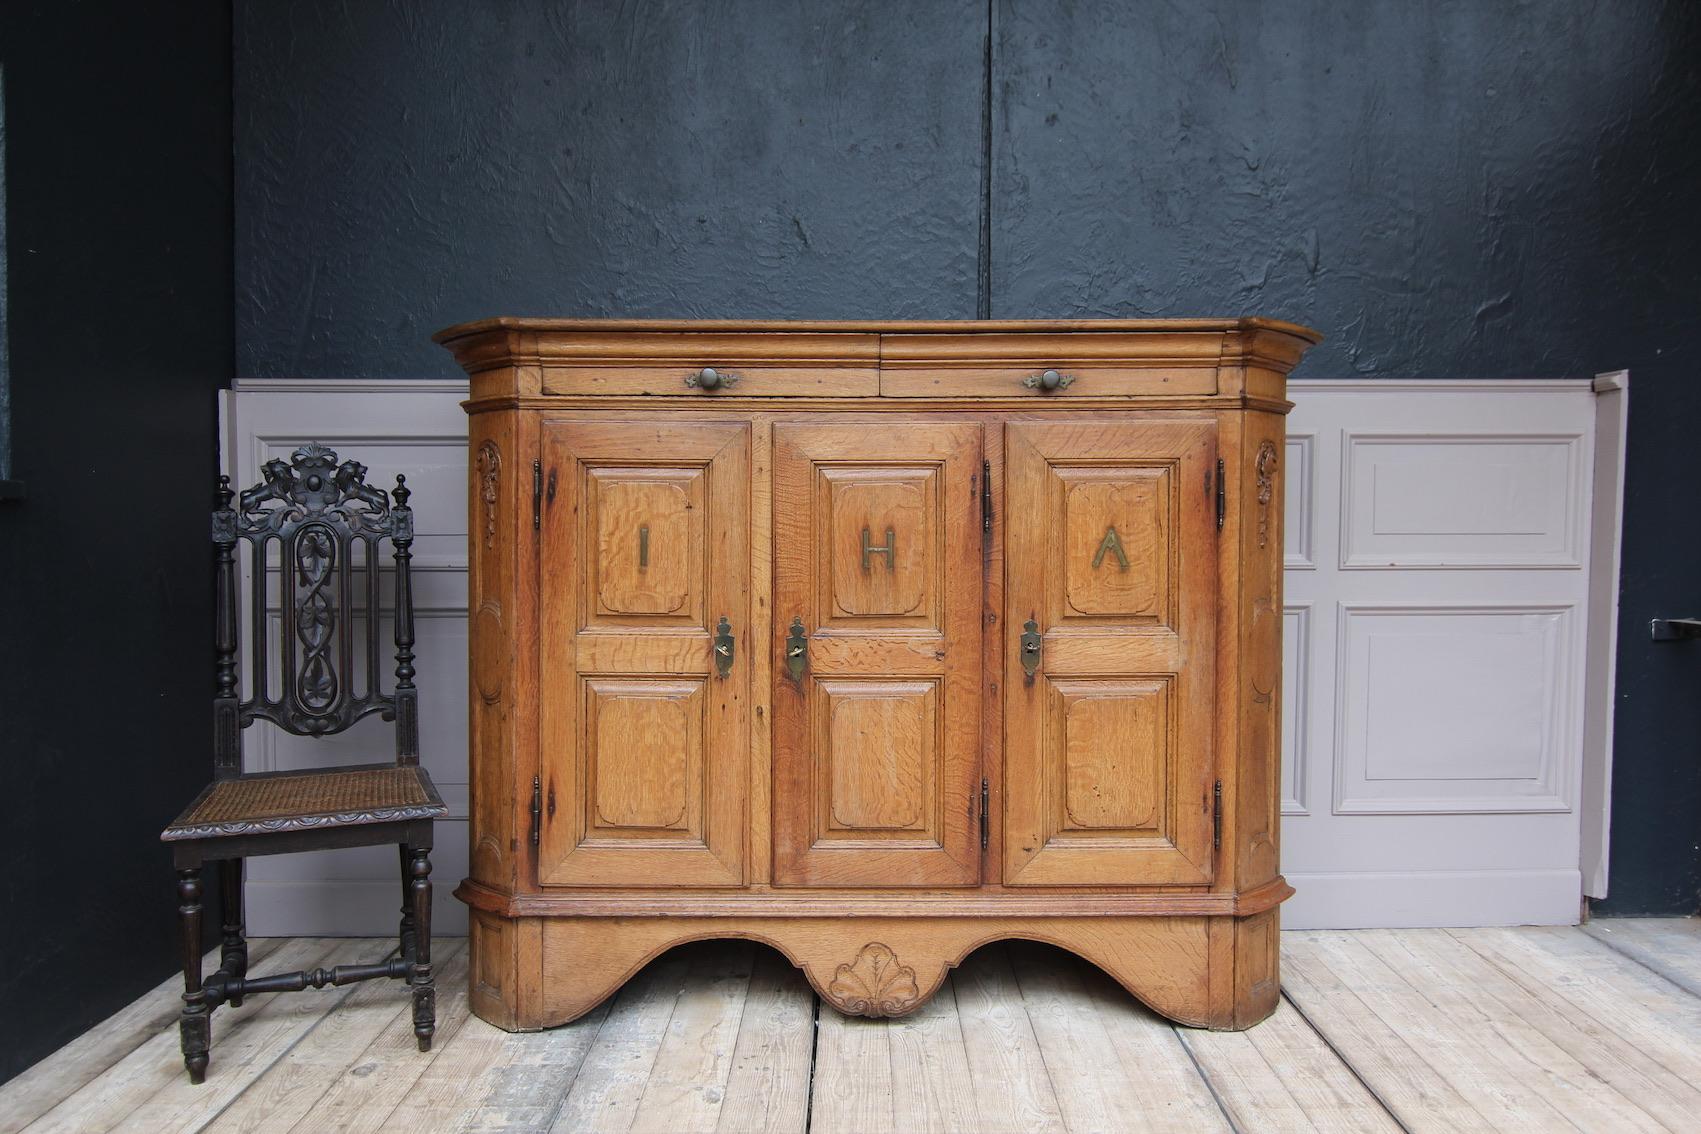 A 18th century German Baroque sideboard made of solid oak. Probably from the Rhineland area.
Body with beveled, slightly rounded corners and matching cover plate. Double curved cut-out base with floral carving in the center.
3 doors on outside